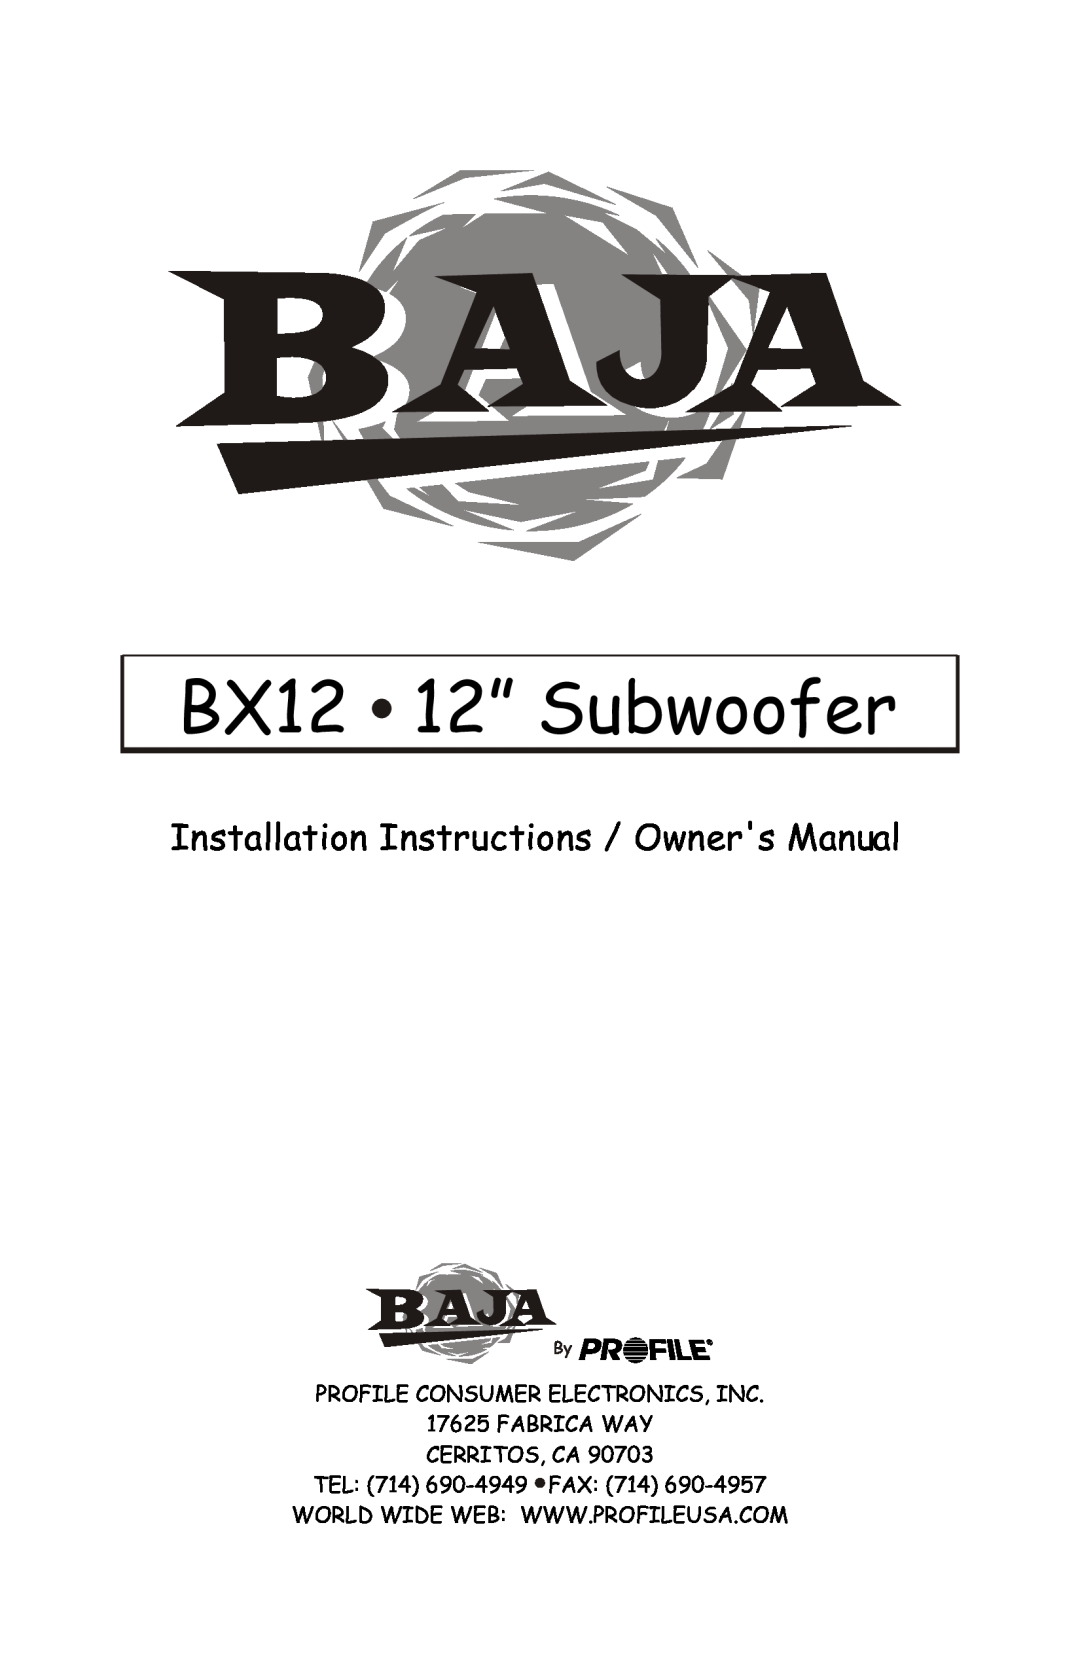 Profile installation instructions BX12 12” Subwoofer 